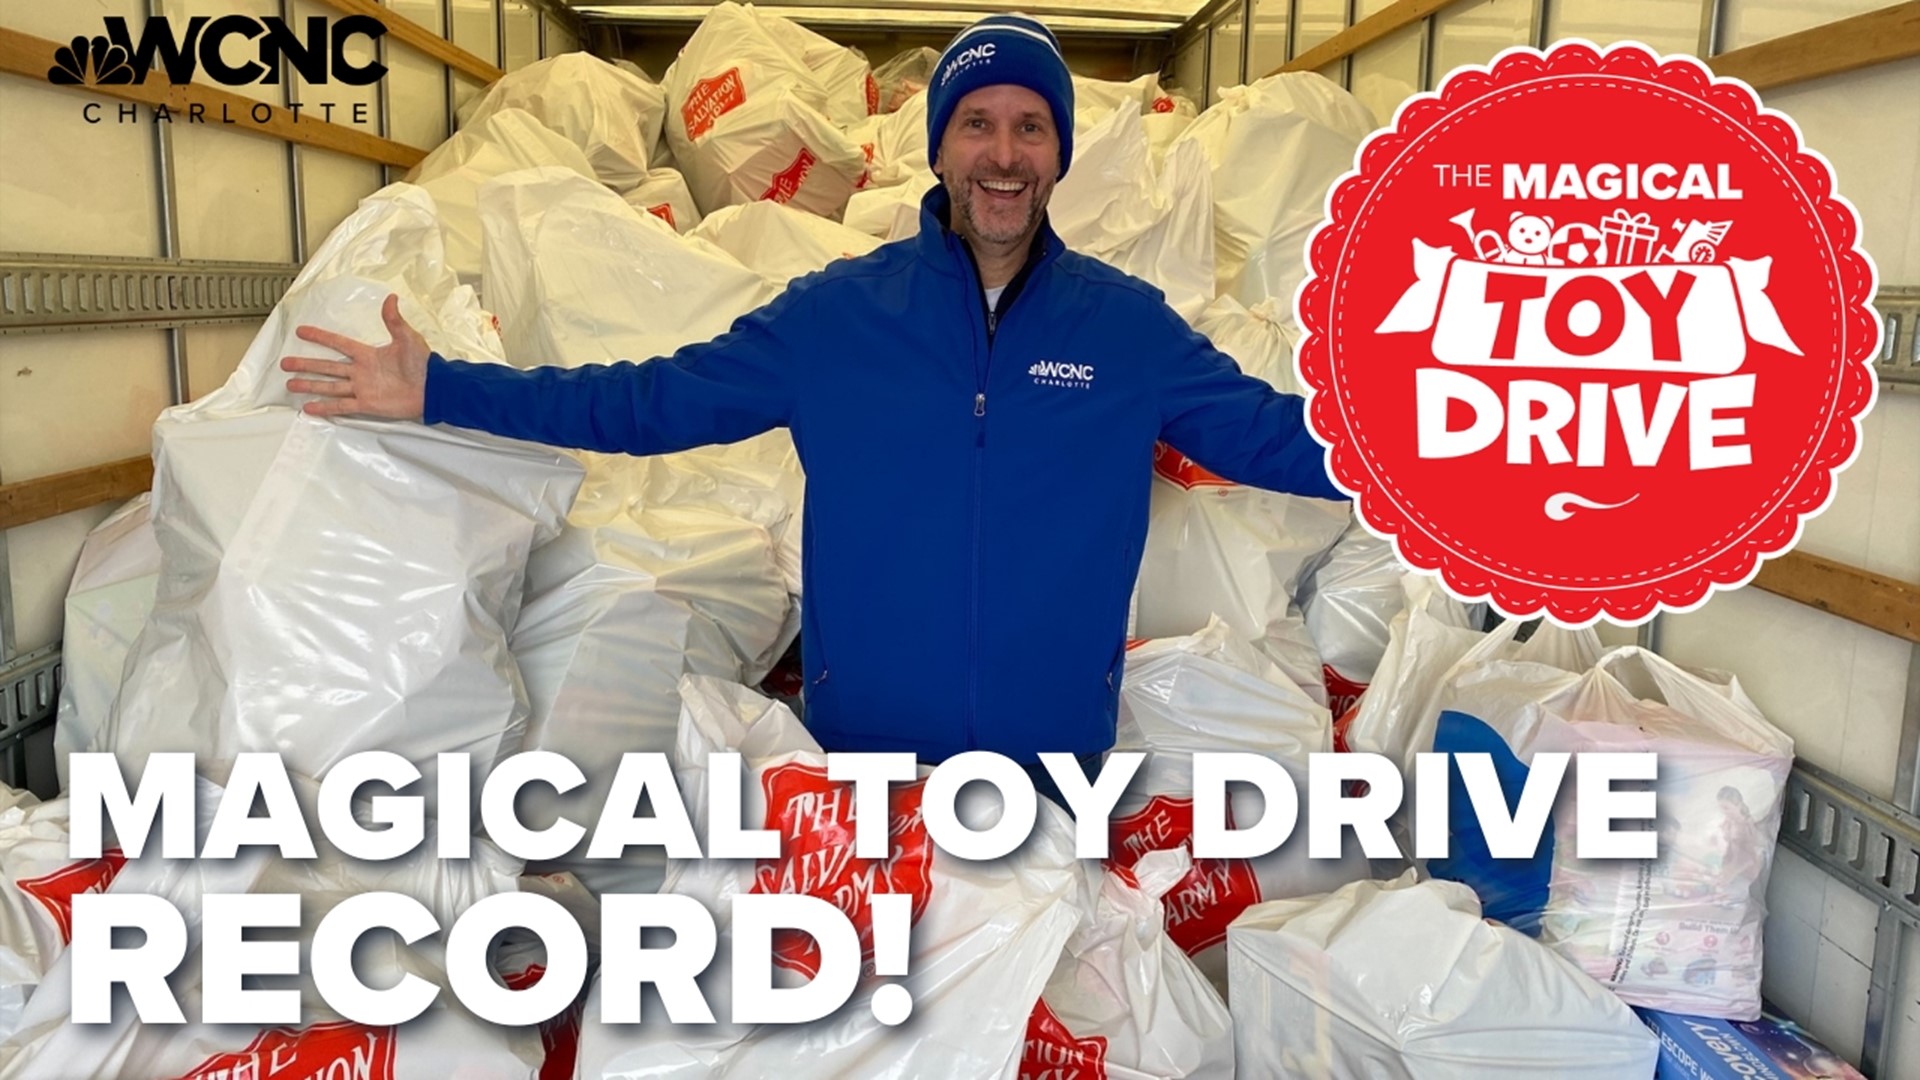 Nearly 3,000 toys were donated on Saturday alone!